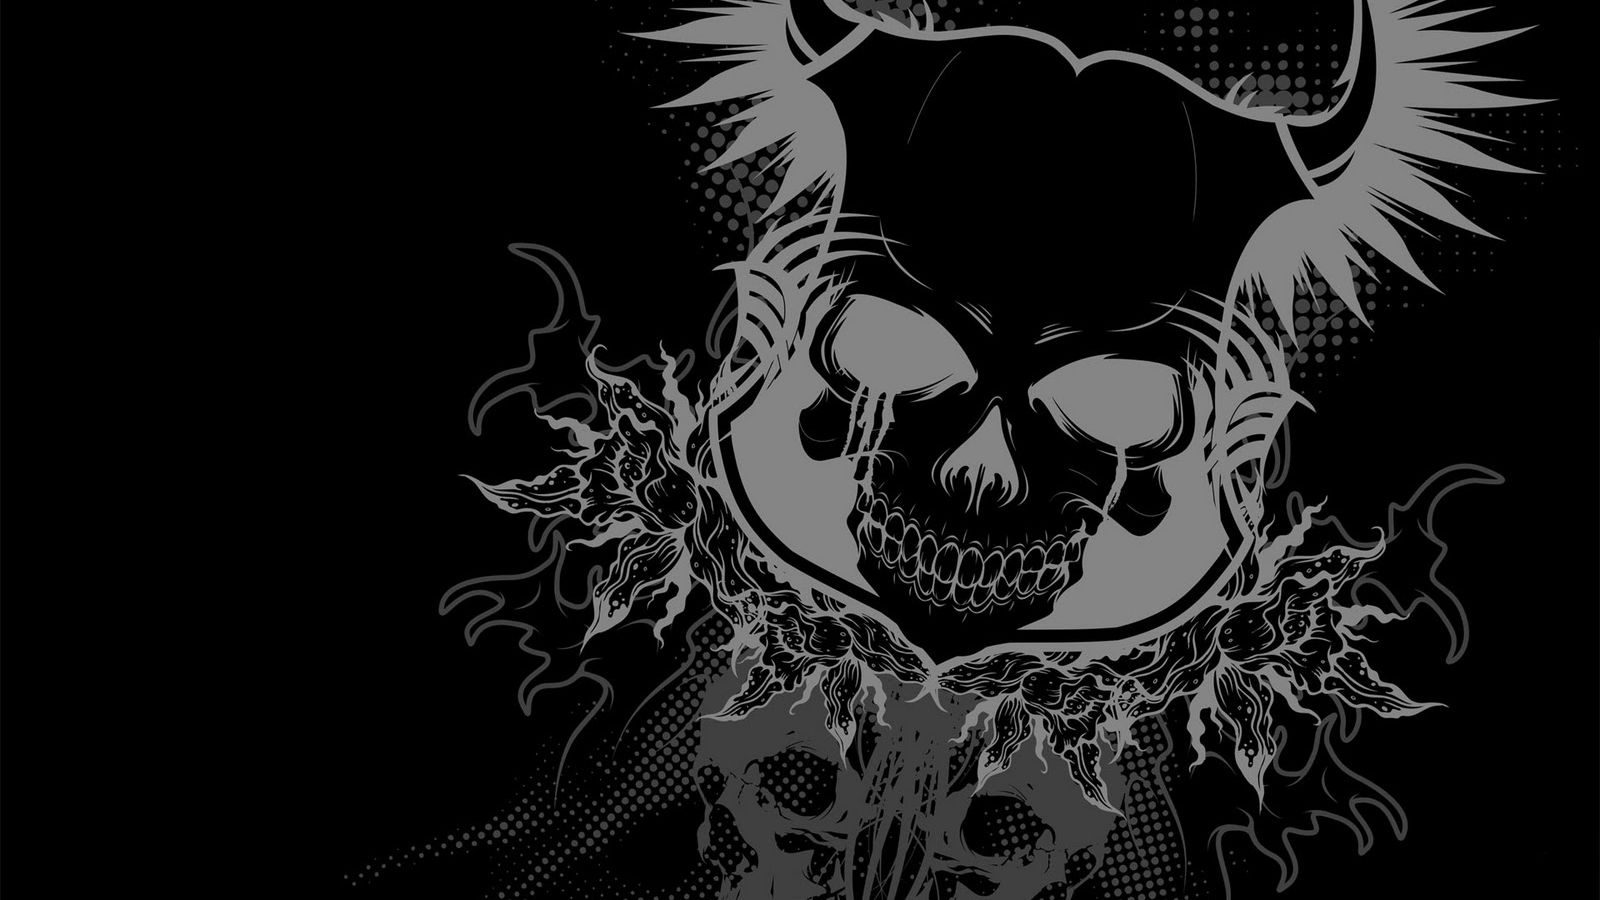 Epic Black and White Wallpapers on WallpaperDog